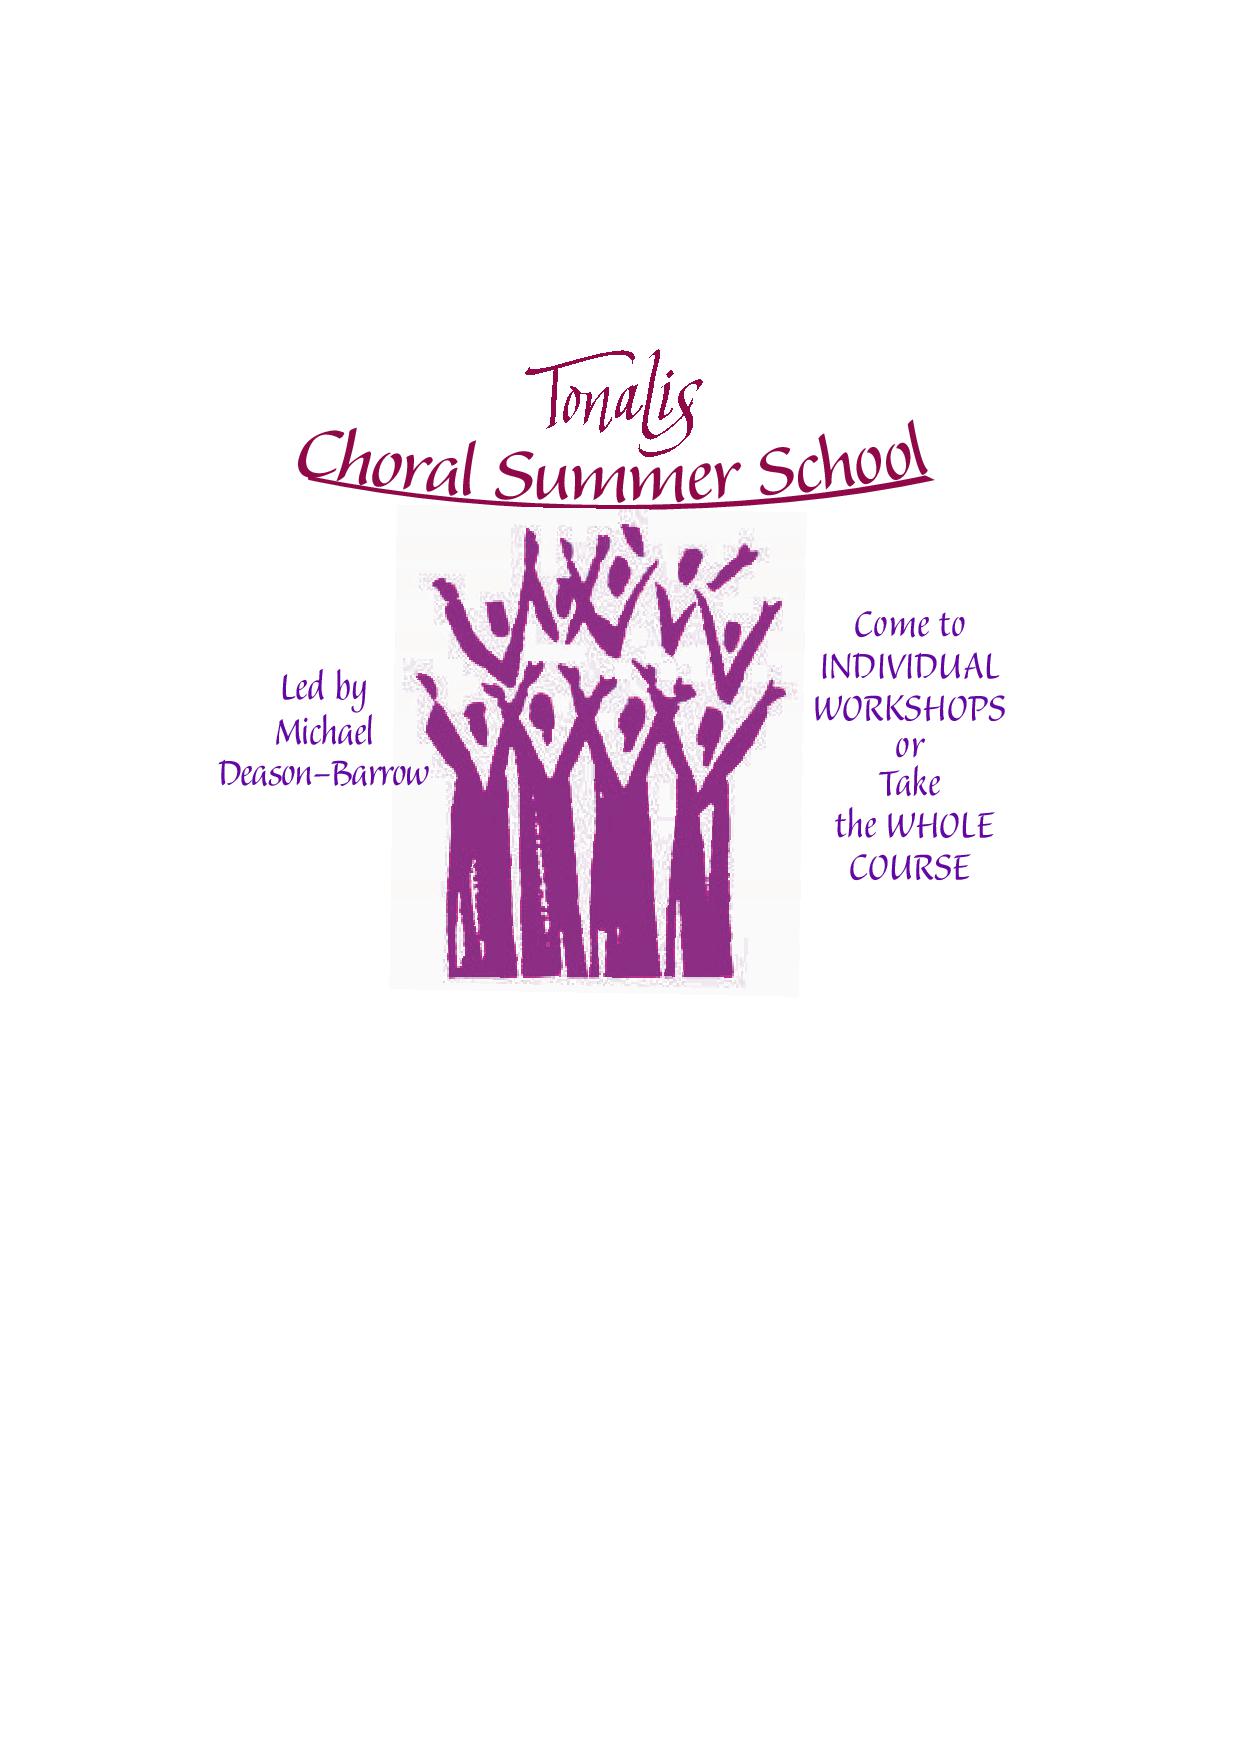 GLOUCESTERSHIRE - Tonalis CHORAL SUMMER SCHOOL: Open Doors into Choral Styles & 